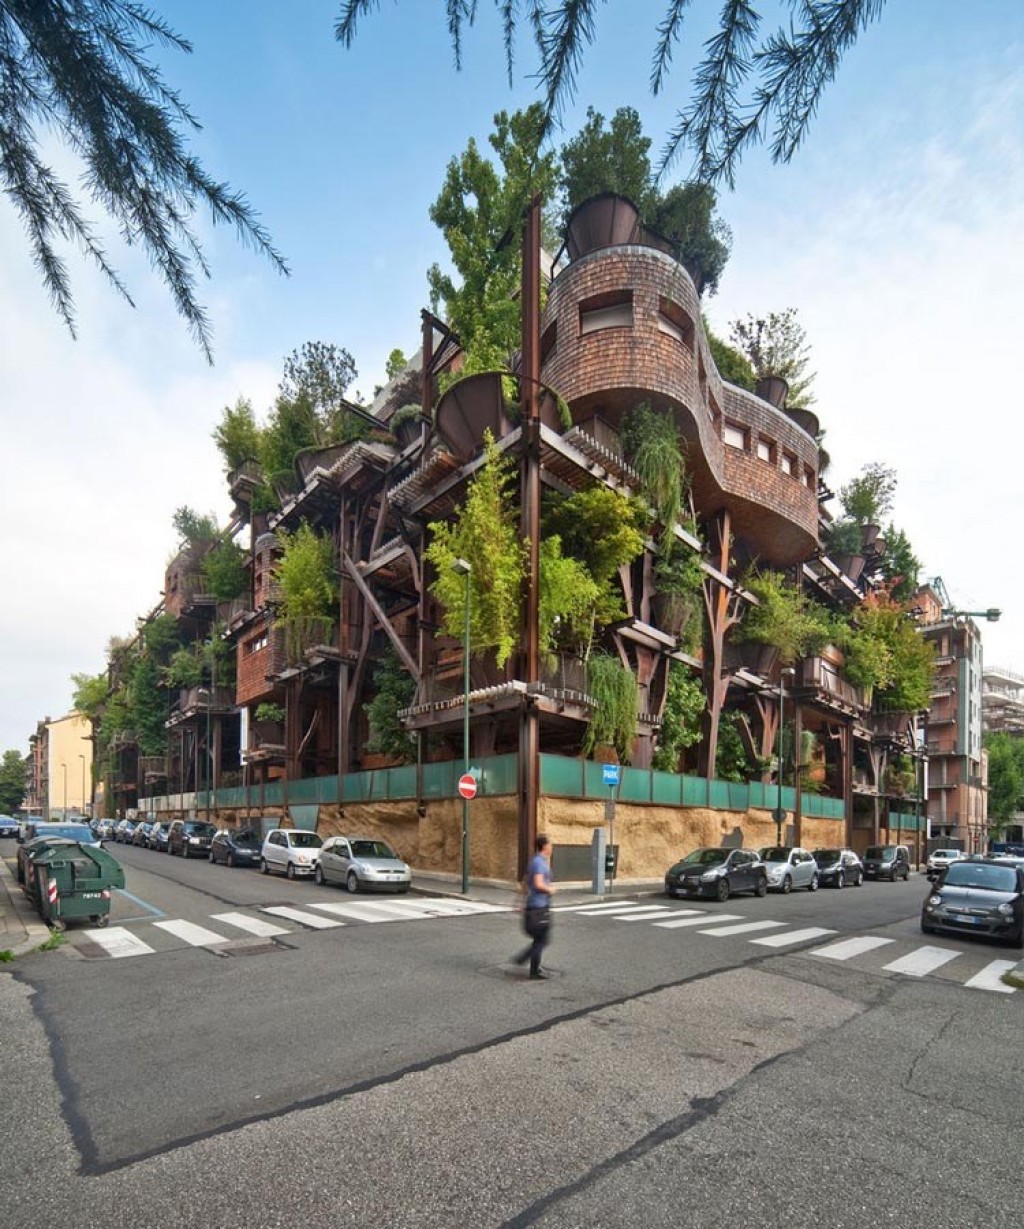 25 Verde, A Five-Story Residential Building in Turin, Italy That Has 150 Trees Growing on Its Balconies and Roof